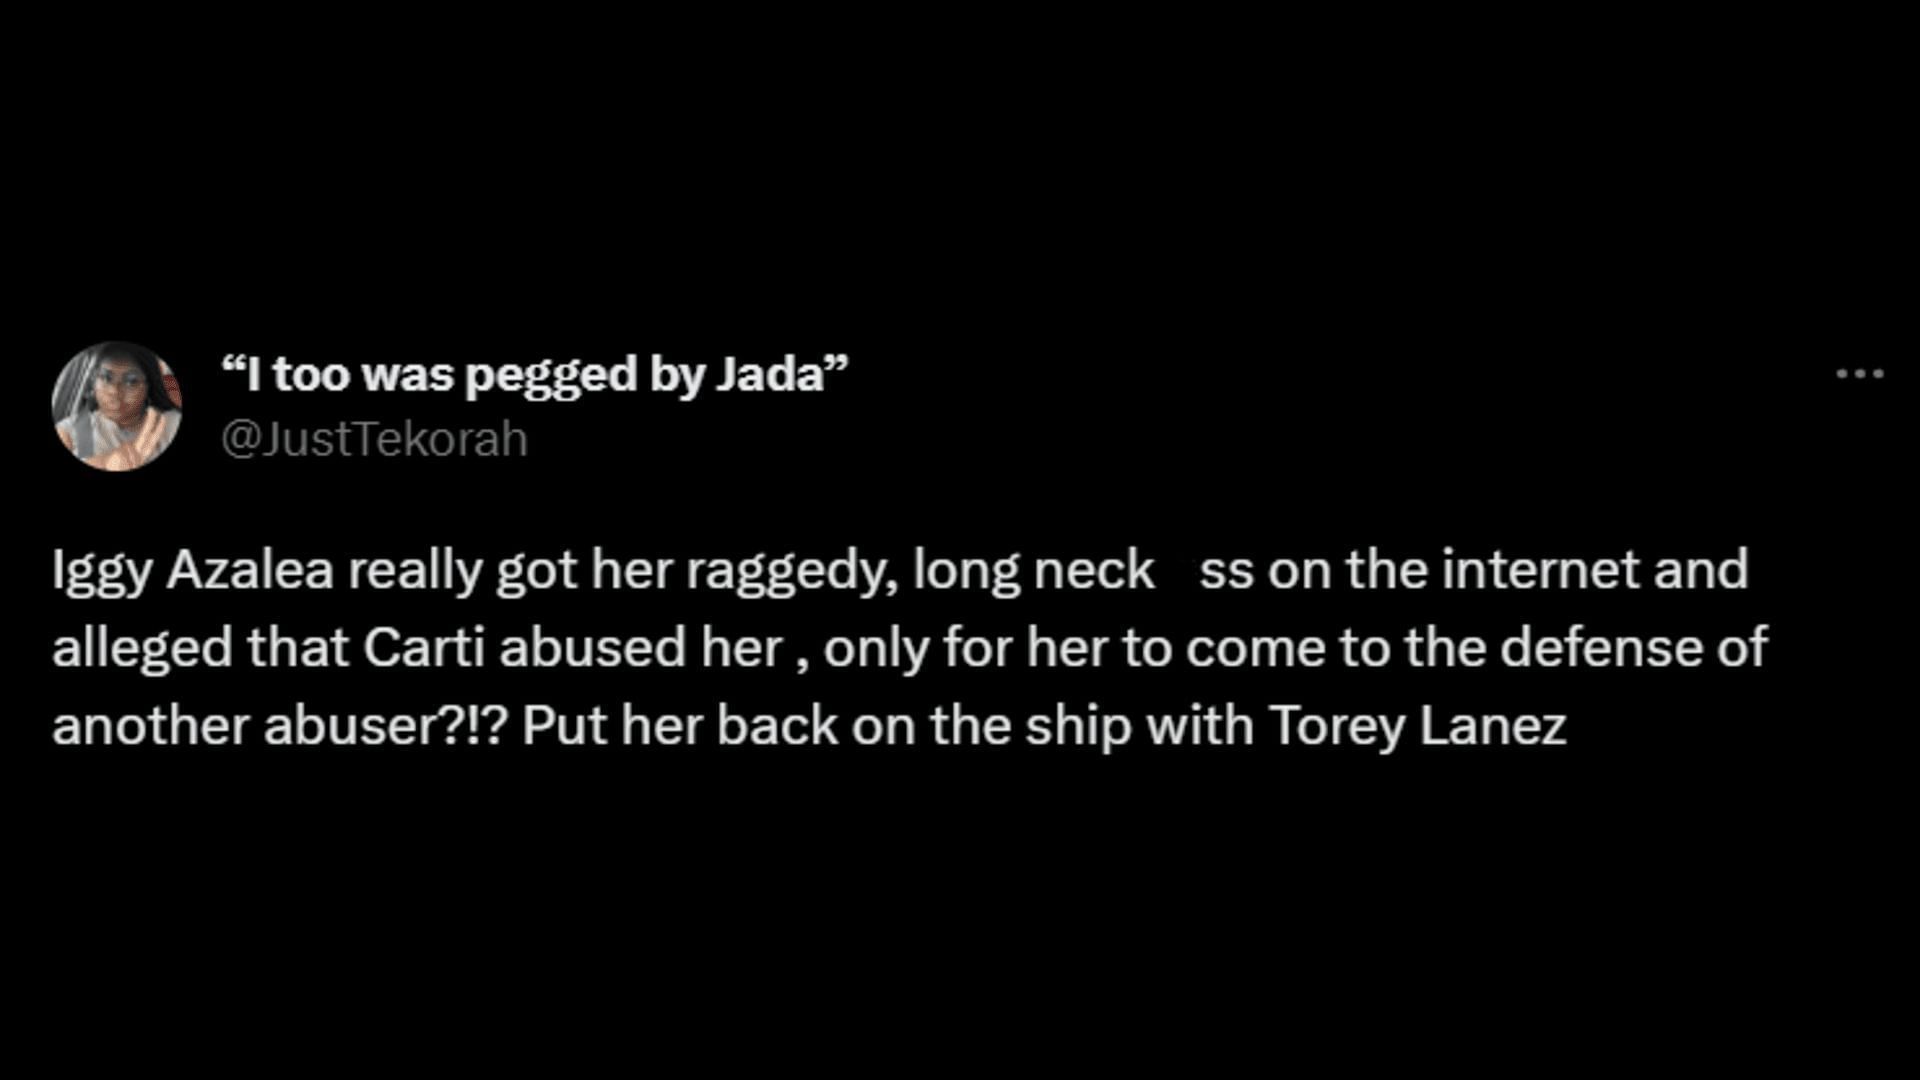 A netizen calls out Iggy for supporting an abuser. (Image via Twitter/&quot;I too was pegged by Jada&quot;)